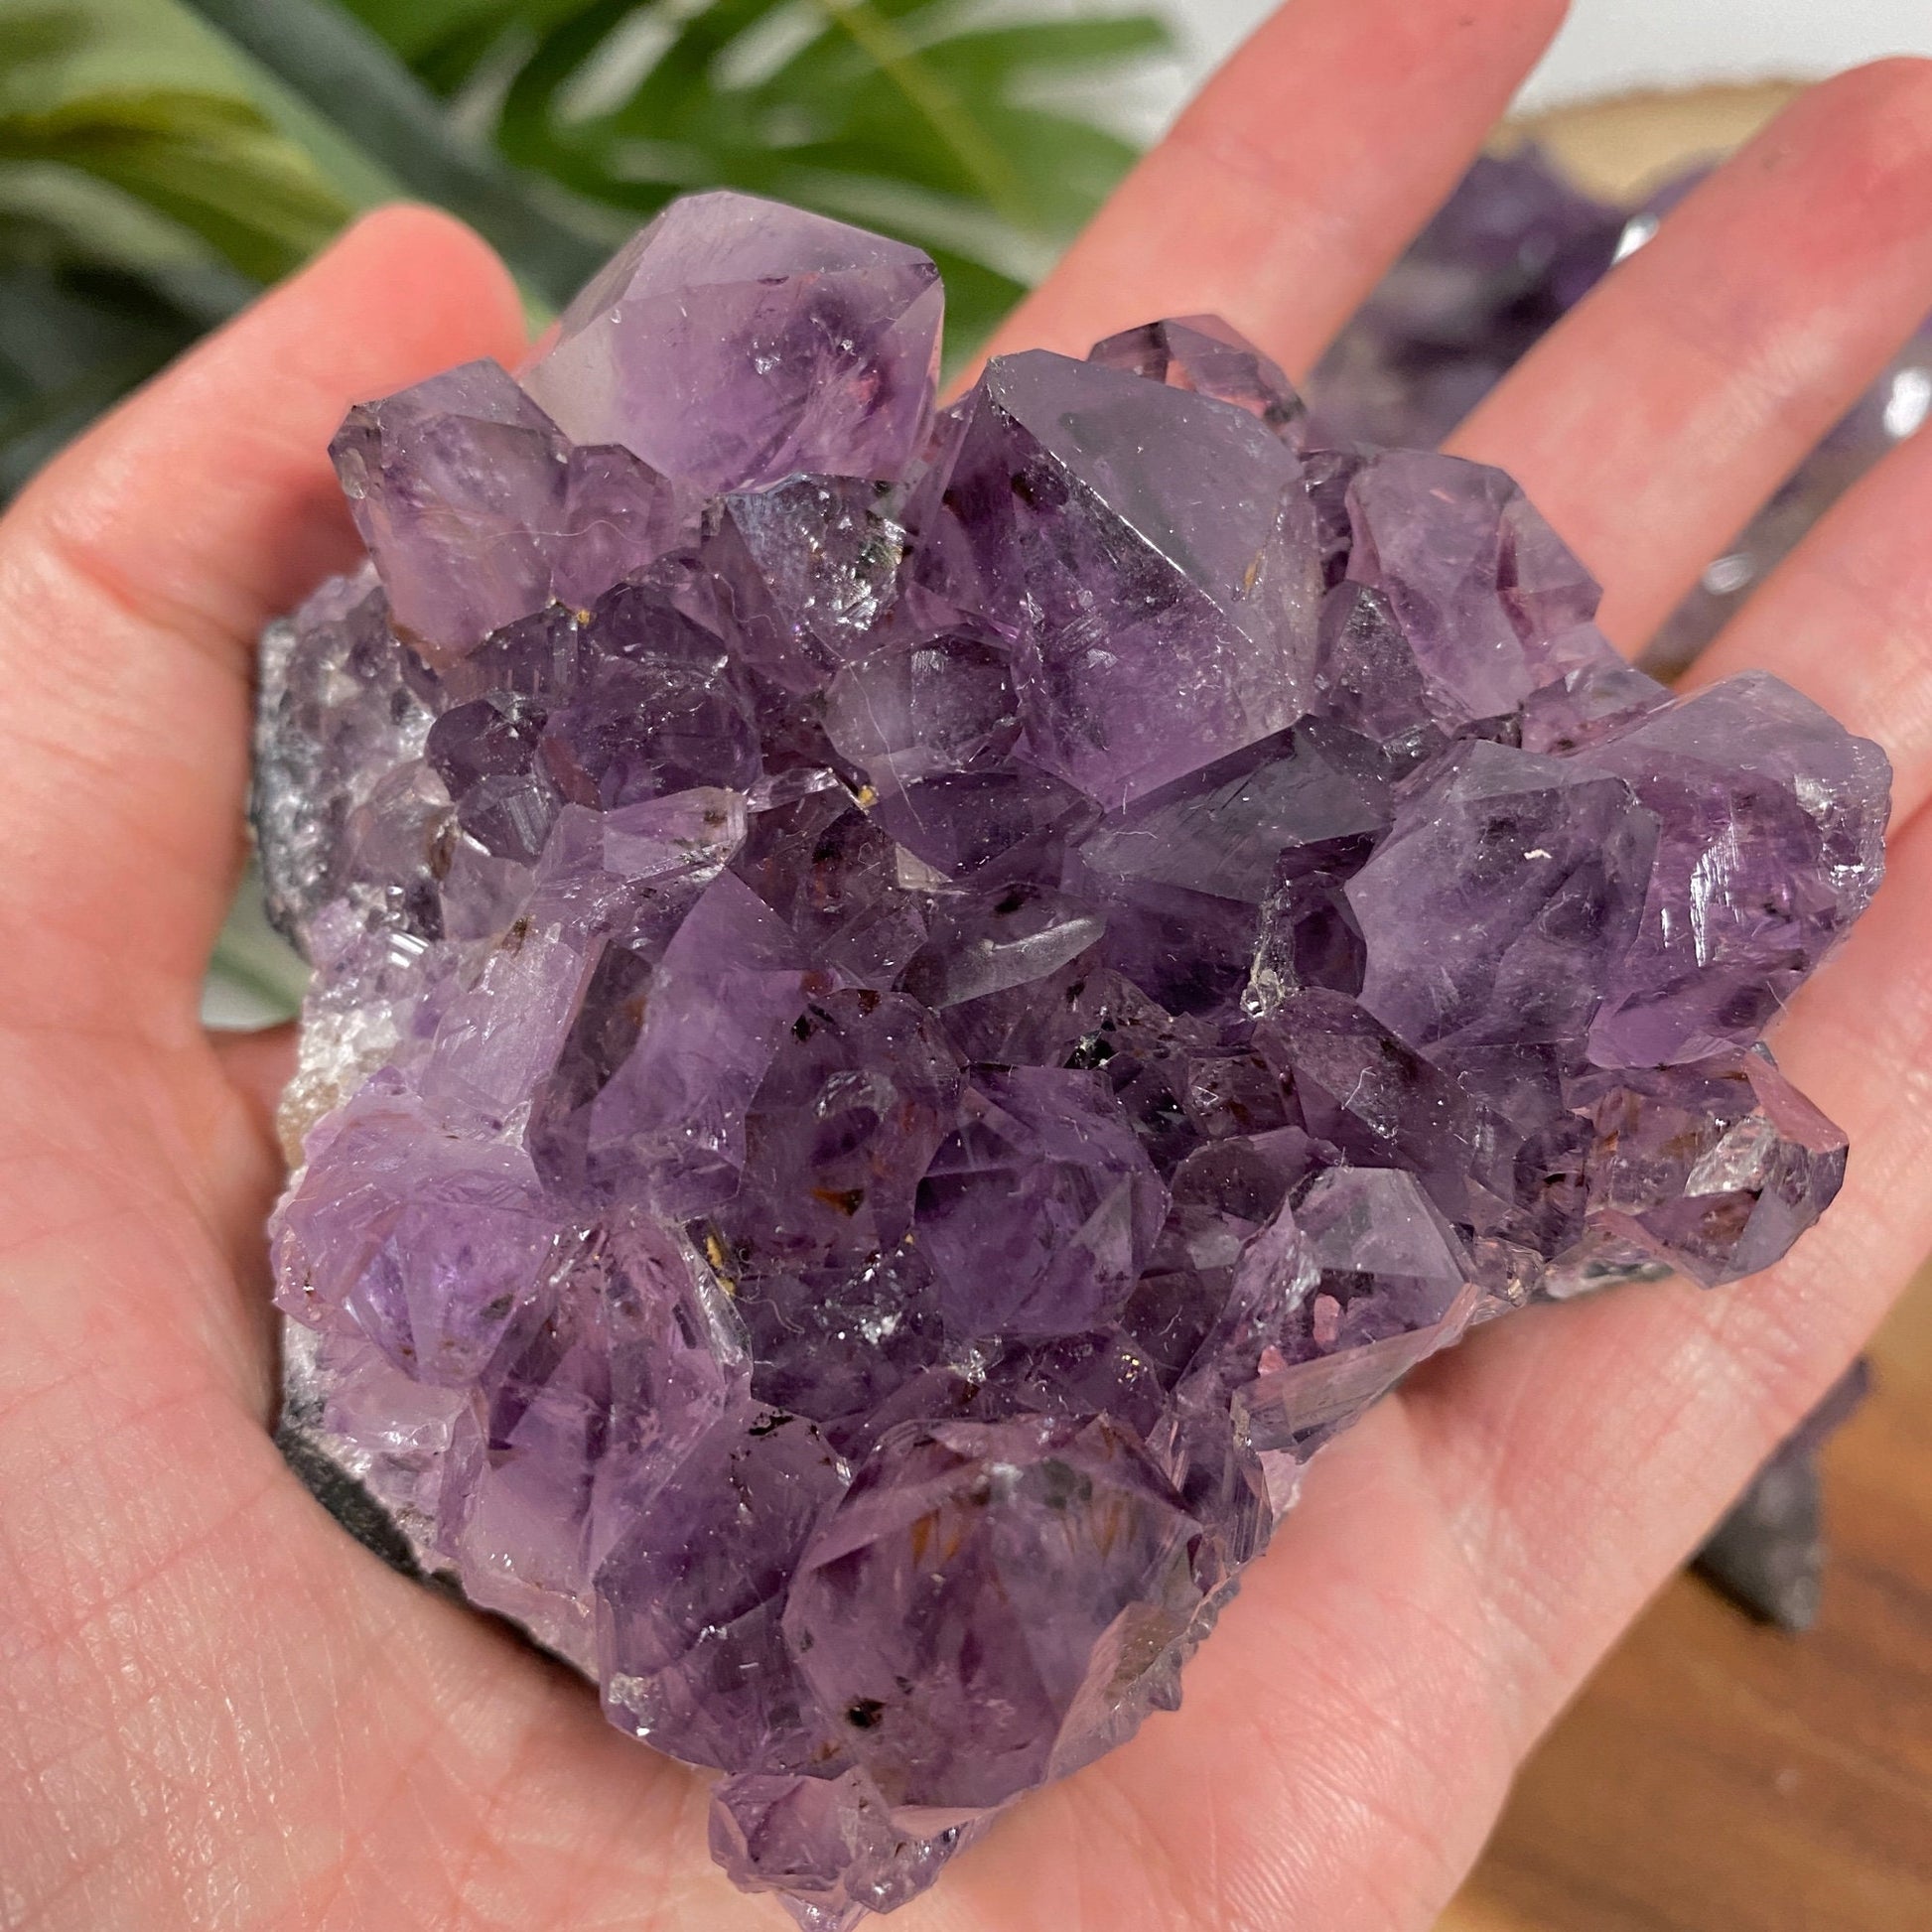 Raw Lilac Violet Amethyst (choose your size) - Lavender Amethyst Druzy from Brazil - Genuine Rough Geode for Crystal Grids, Healing, Reiki